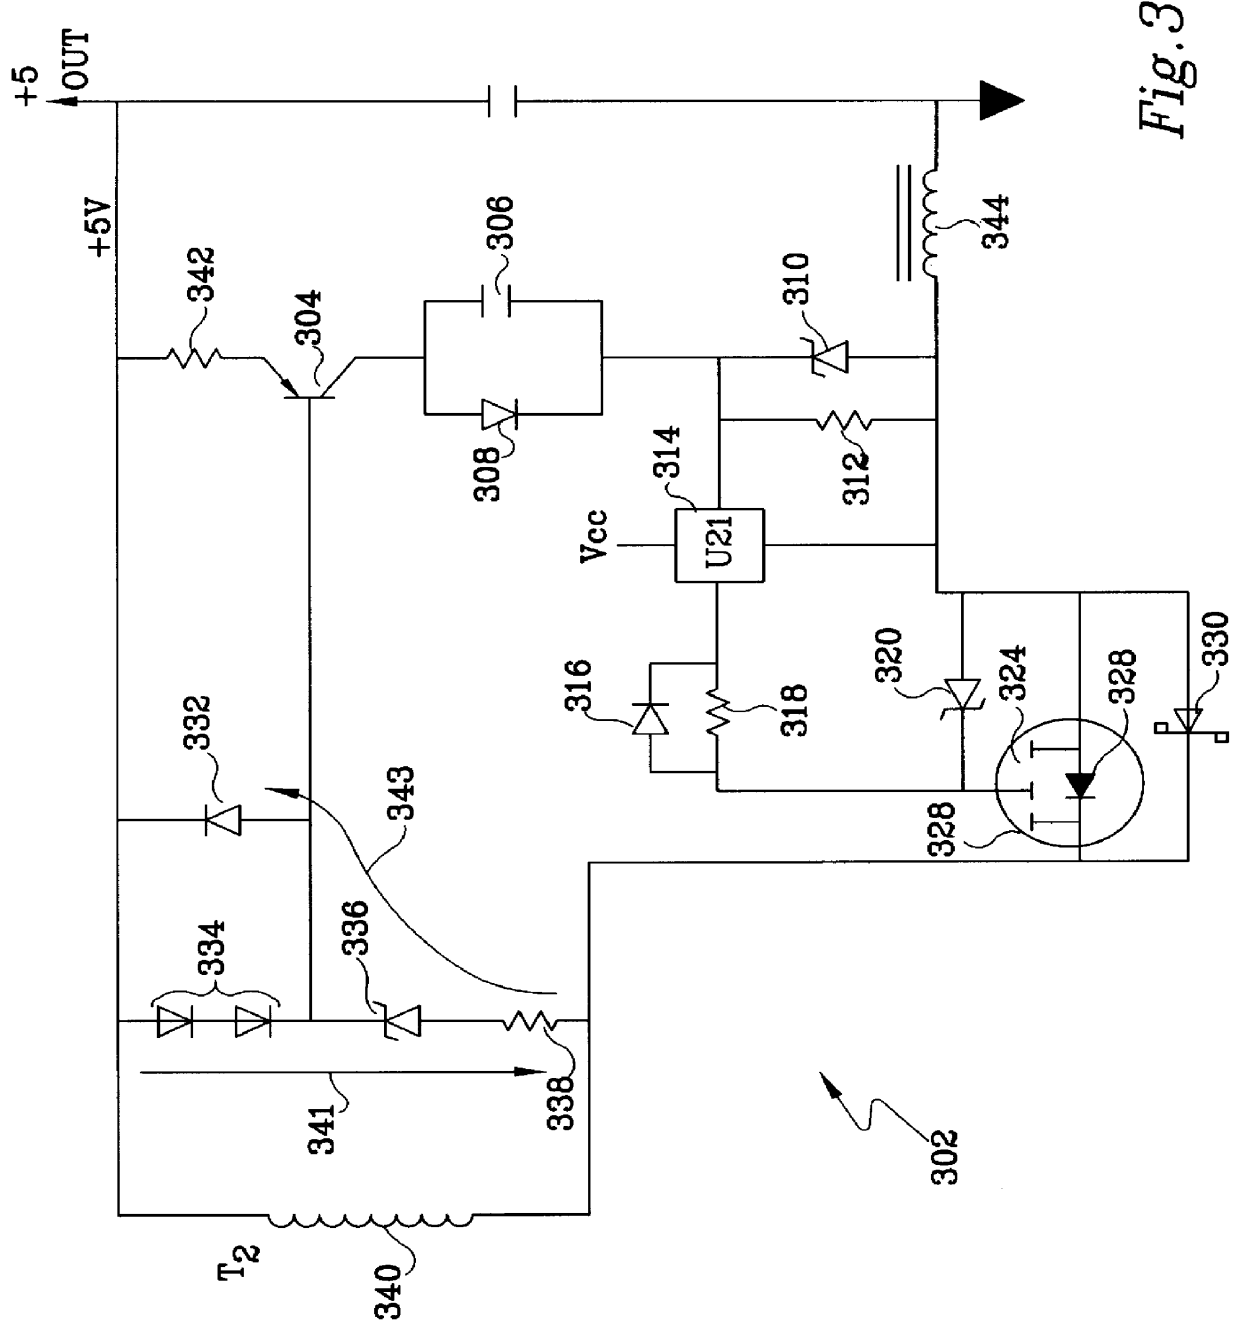 Integrated synchronous rectifier for power supplies